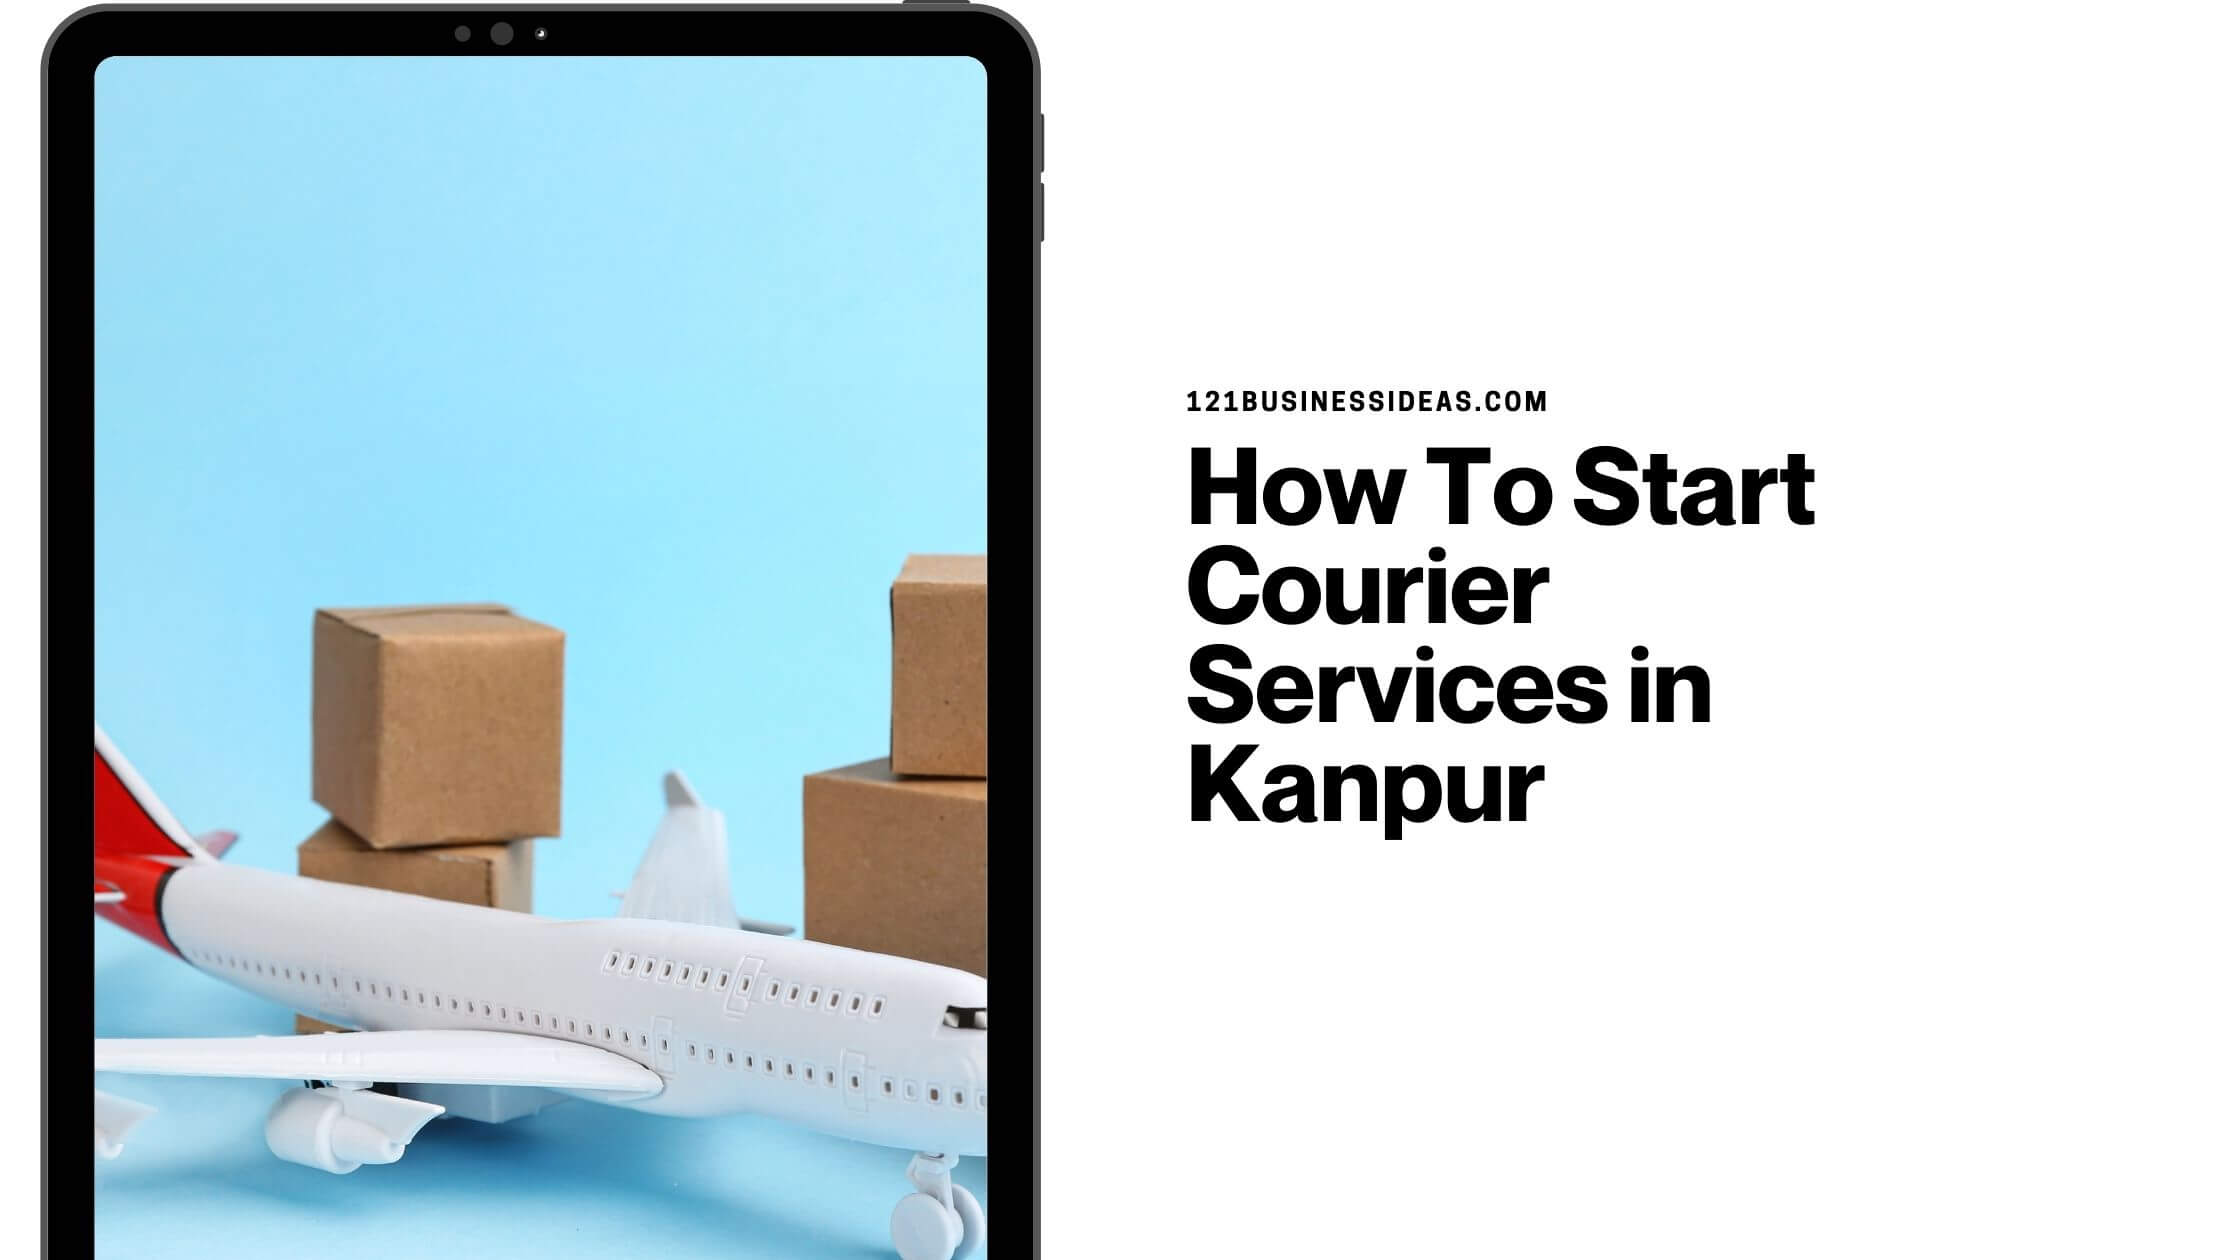 How To Start Courier Services in Kanpur (1)